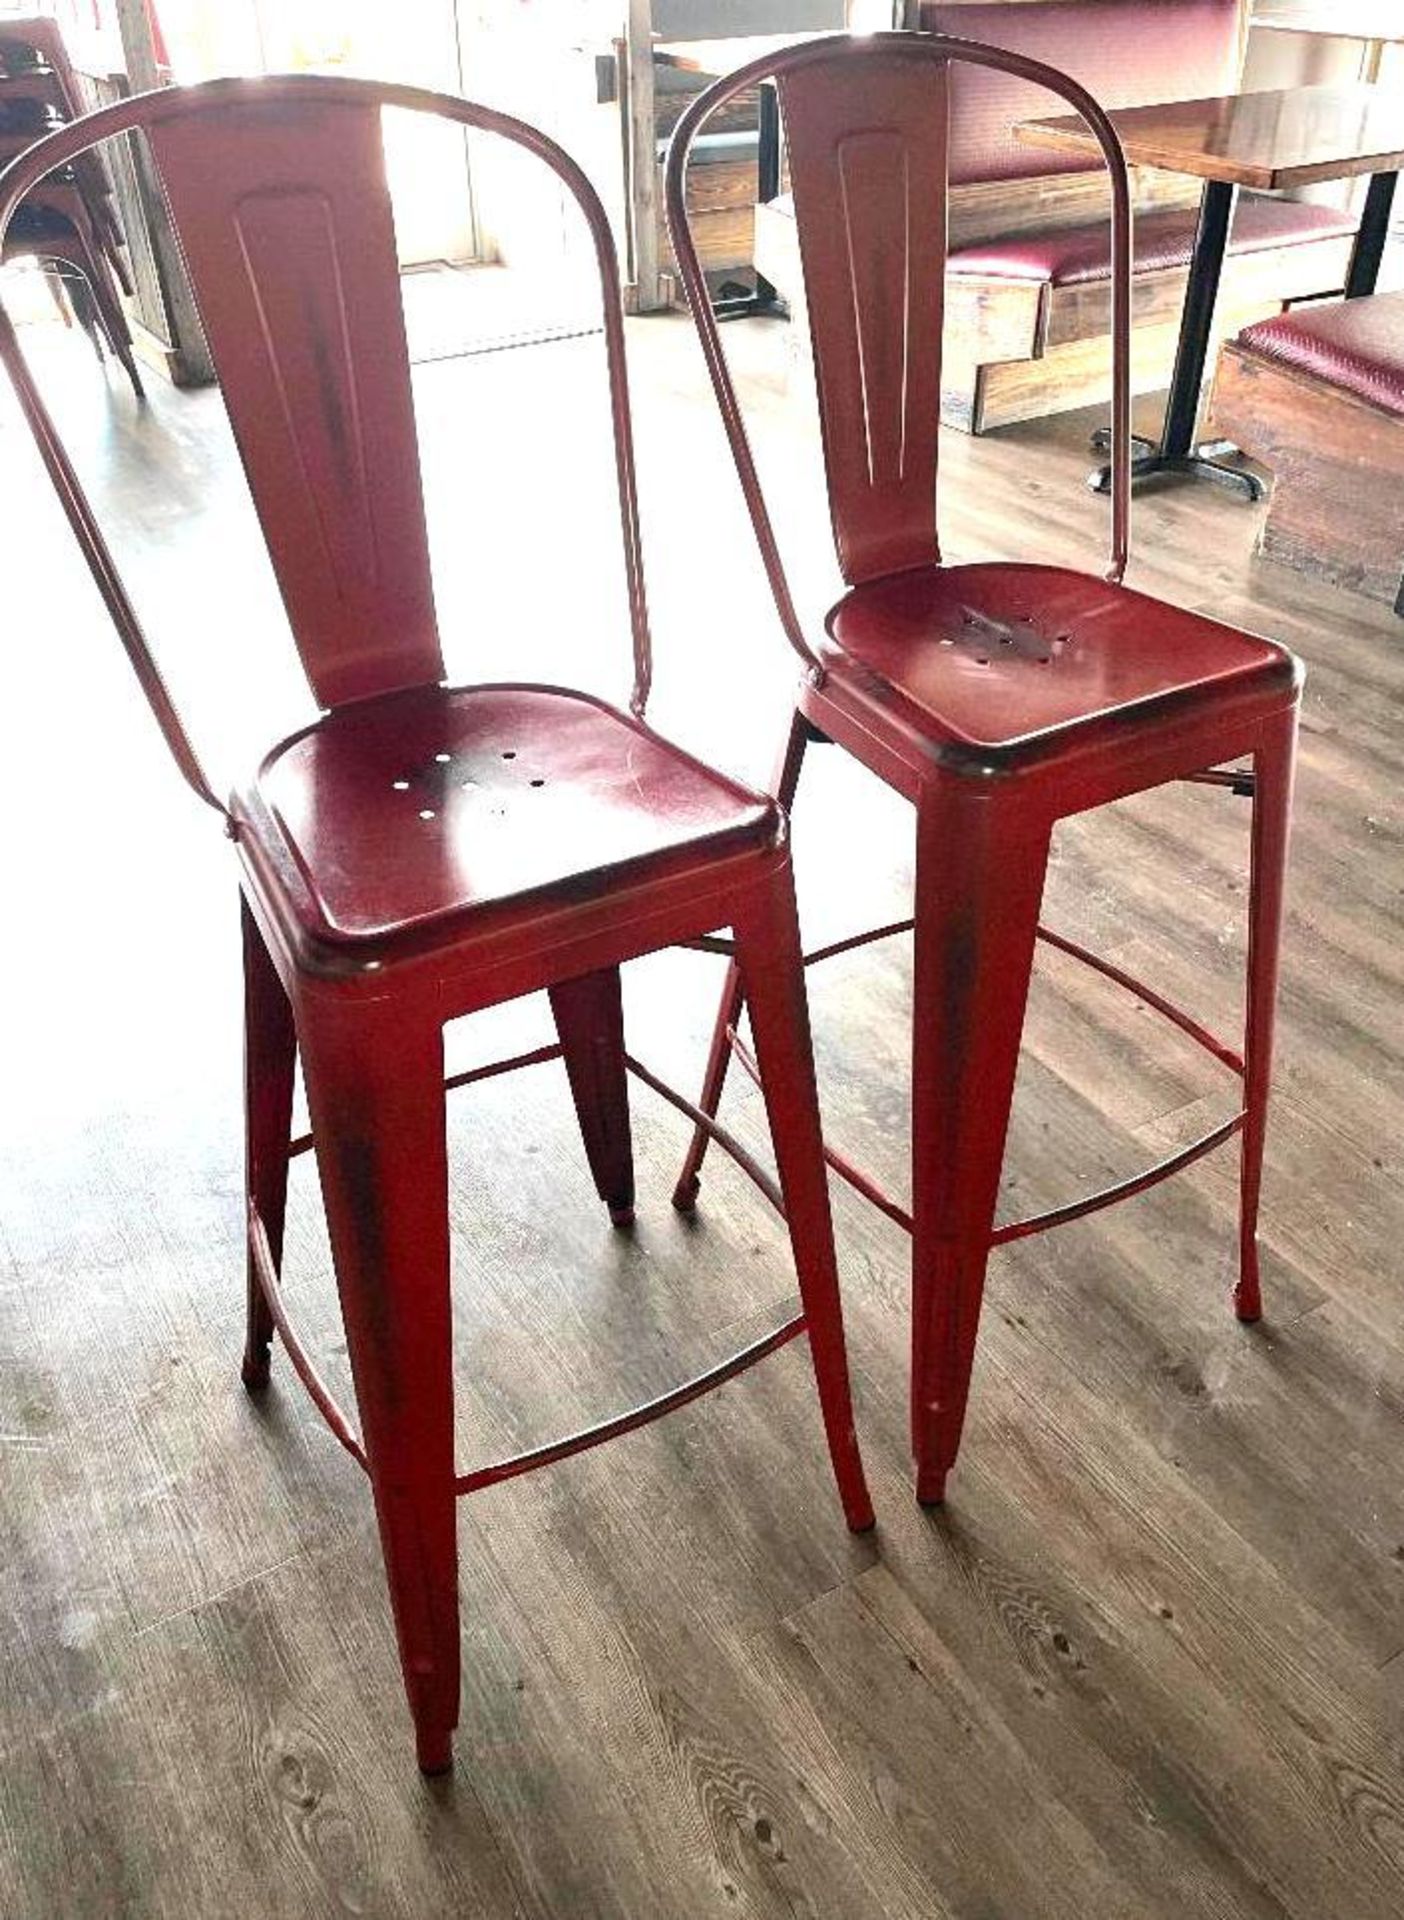 DESCRIPTION: (3) 30" METAL BAR STOOLS ADDITIONAL INFORMATION FADED TABASCO LOCATION: SEATING THIS LO